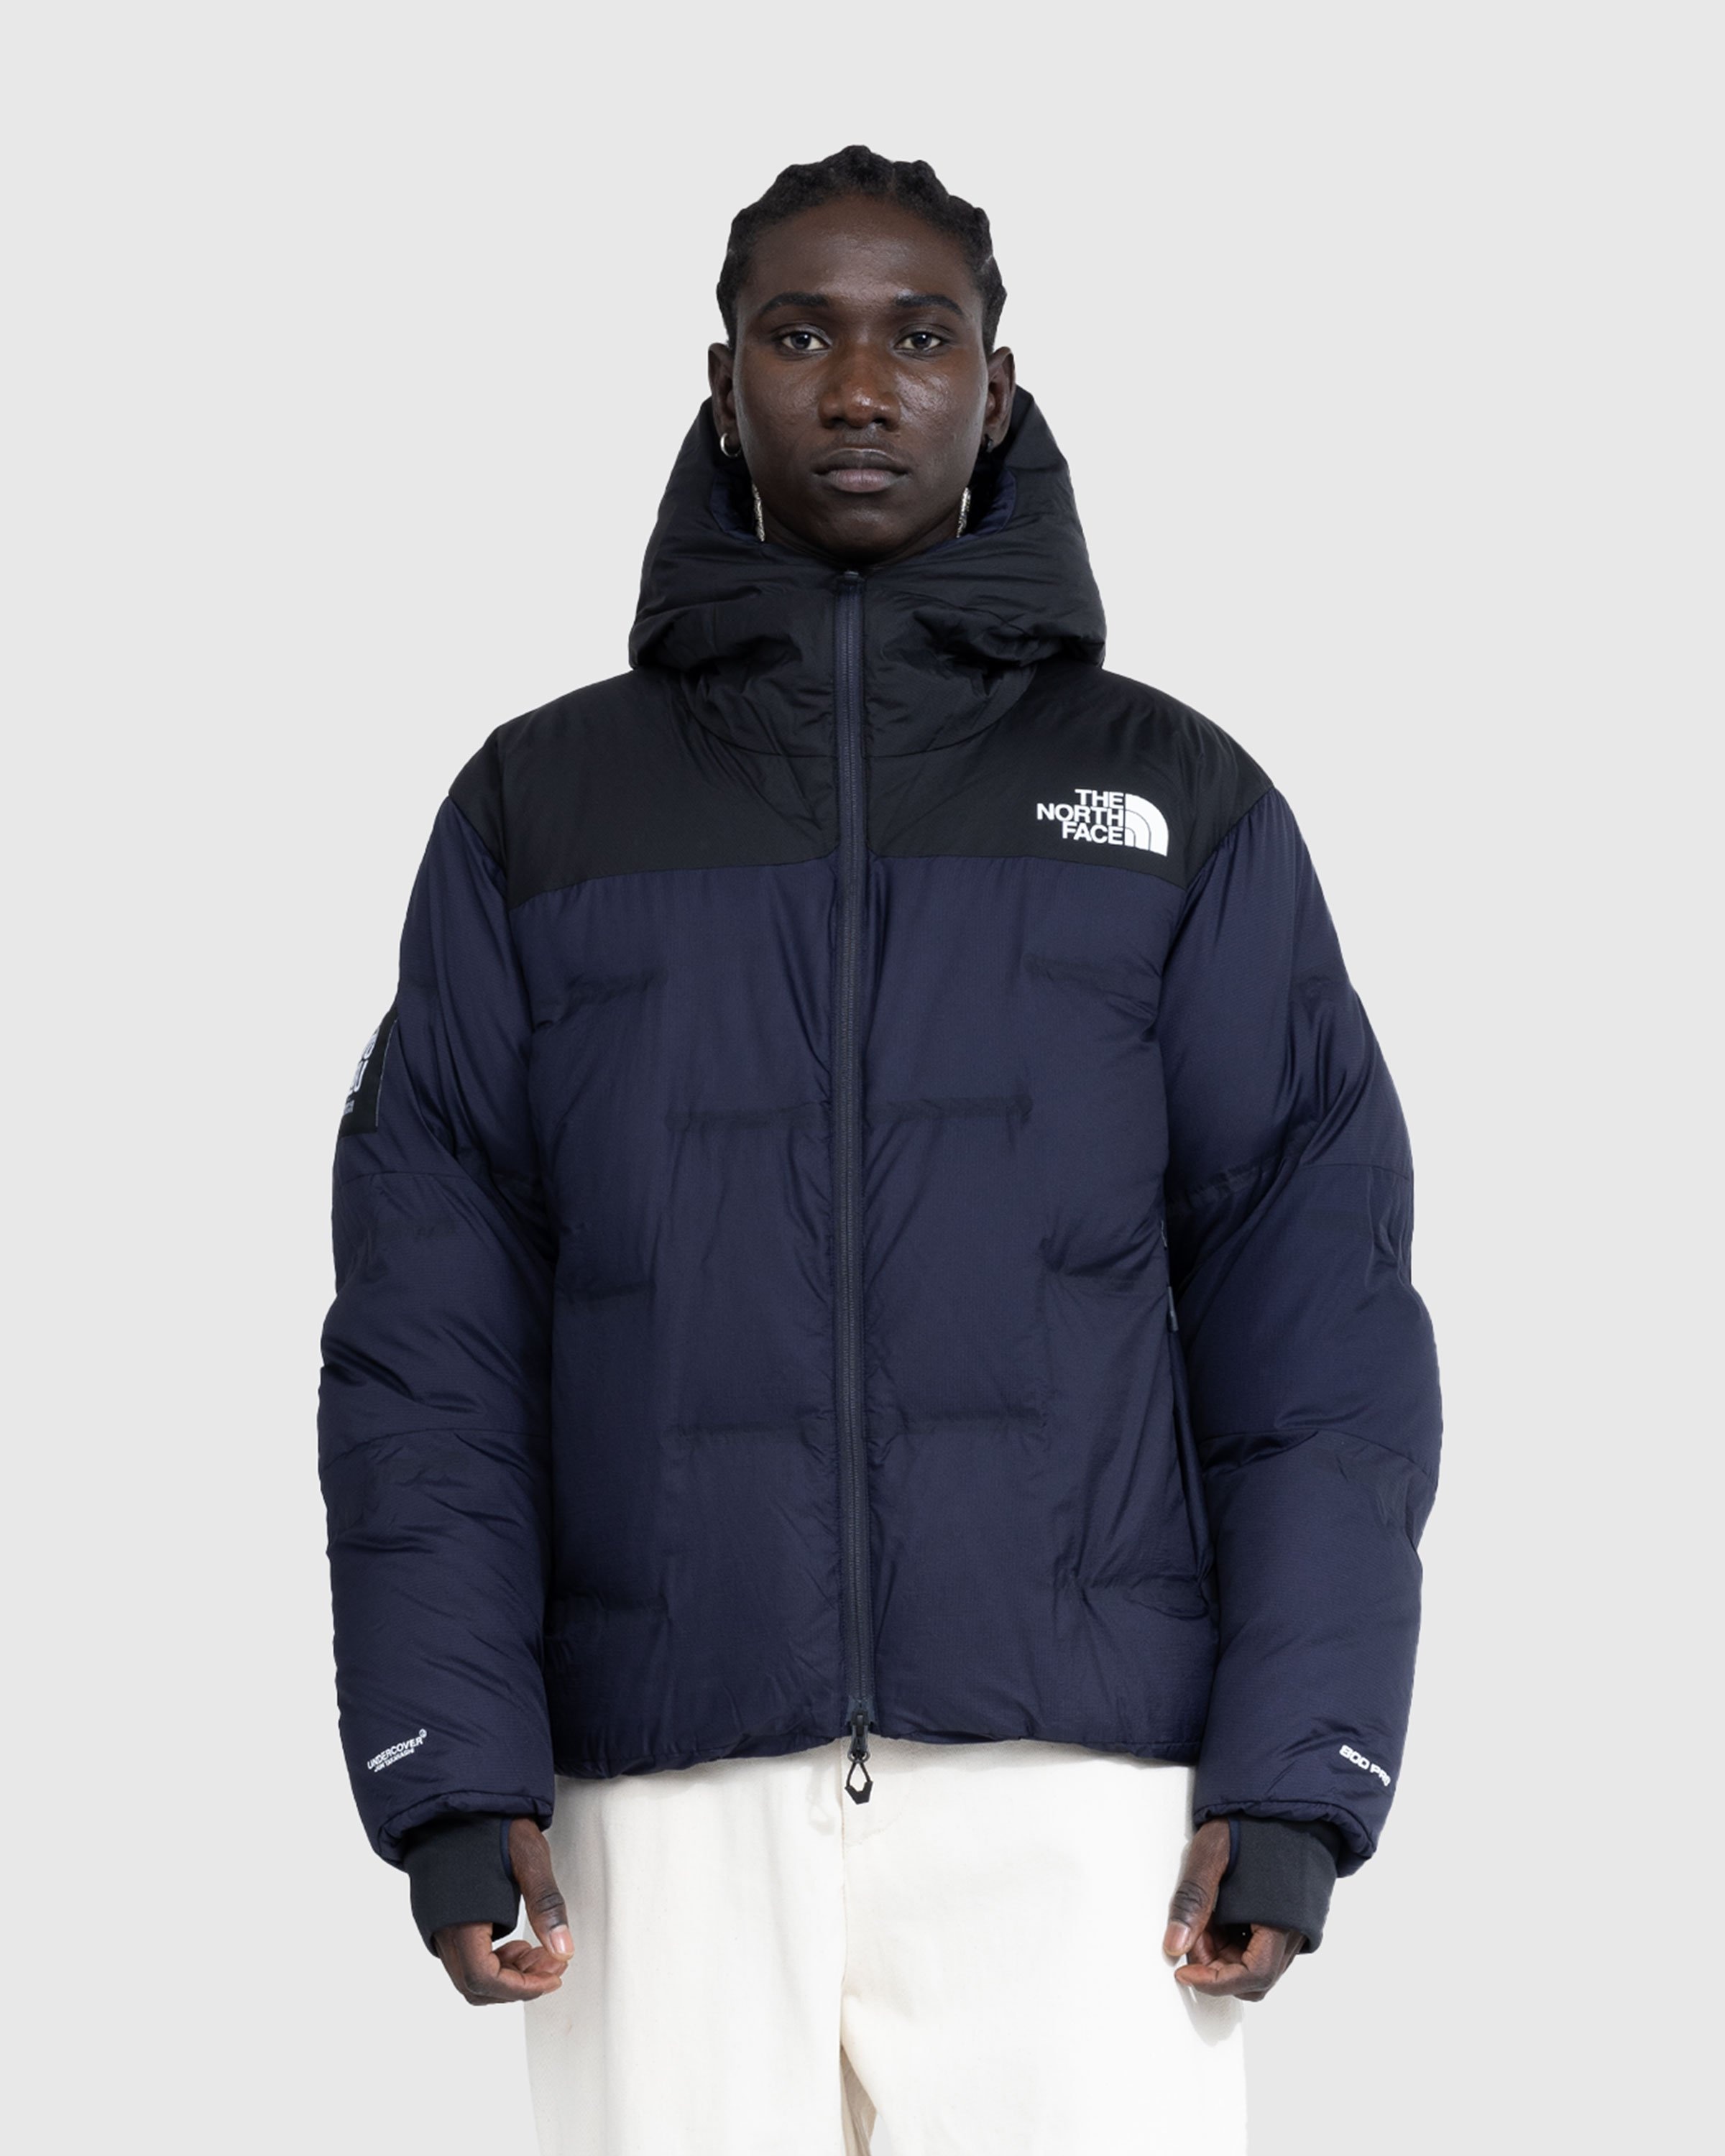 UNDERCOVER x THE NORTH FACE Jacket - ジャケット・アウター